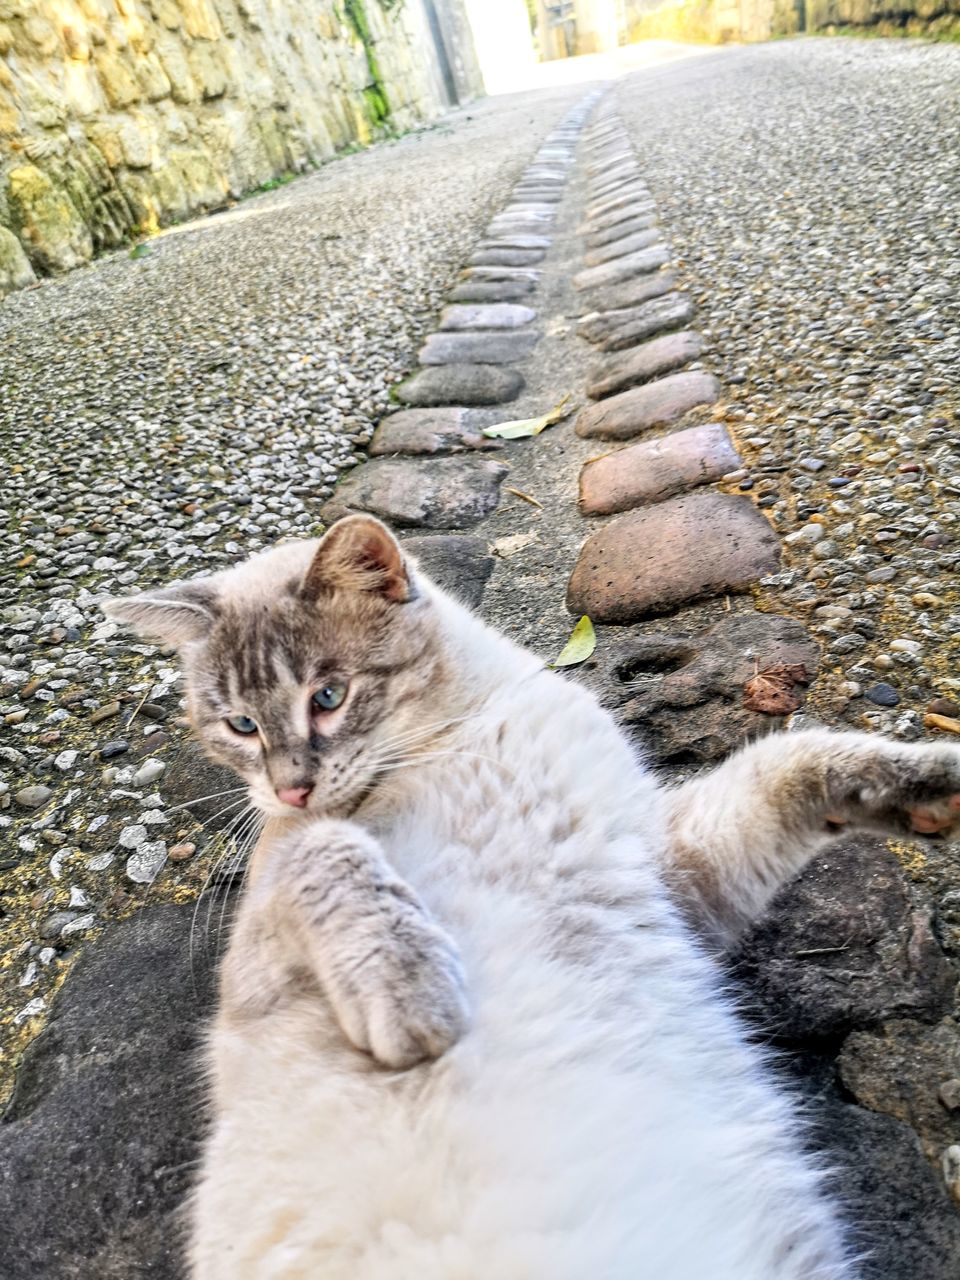 PORTRAIT OF CAT ON FOOTPATH